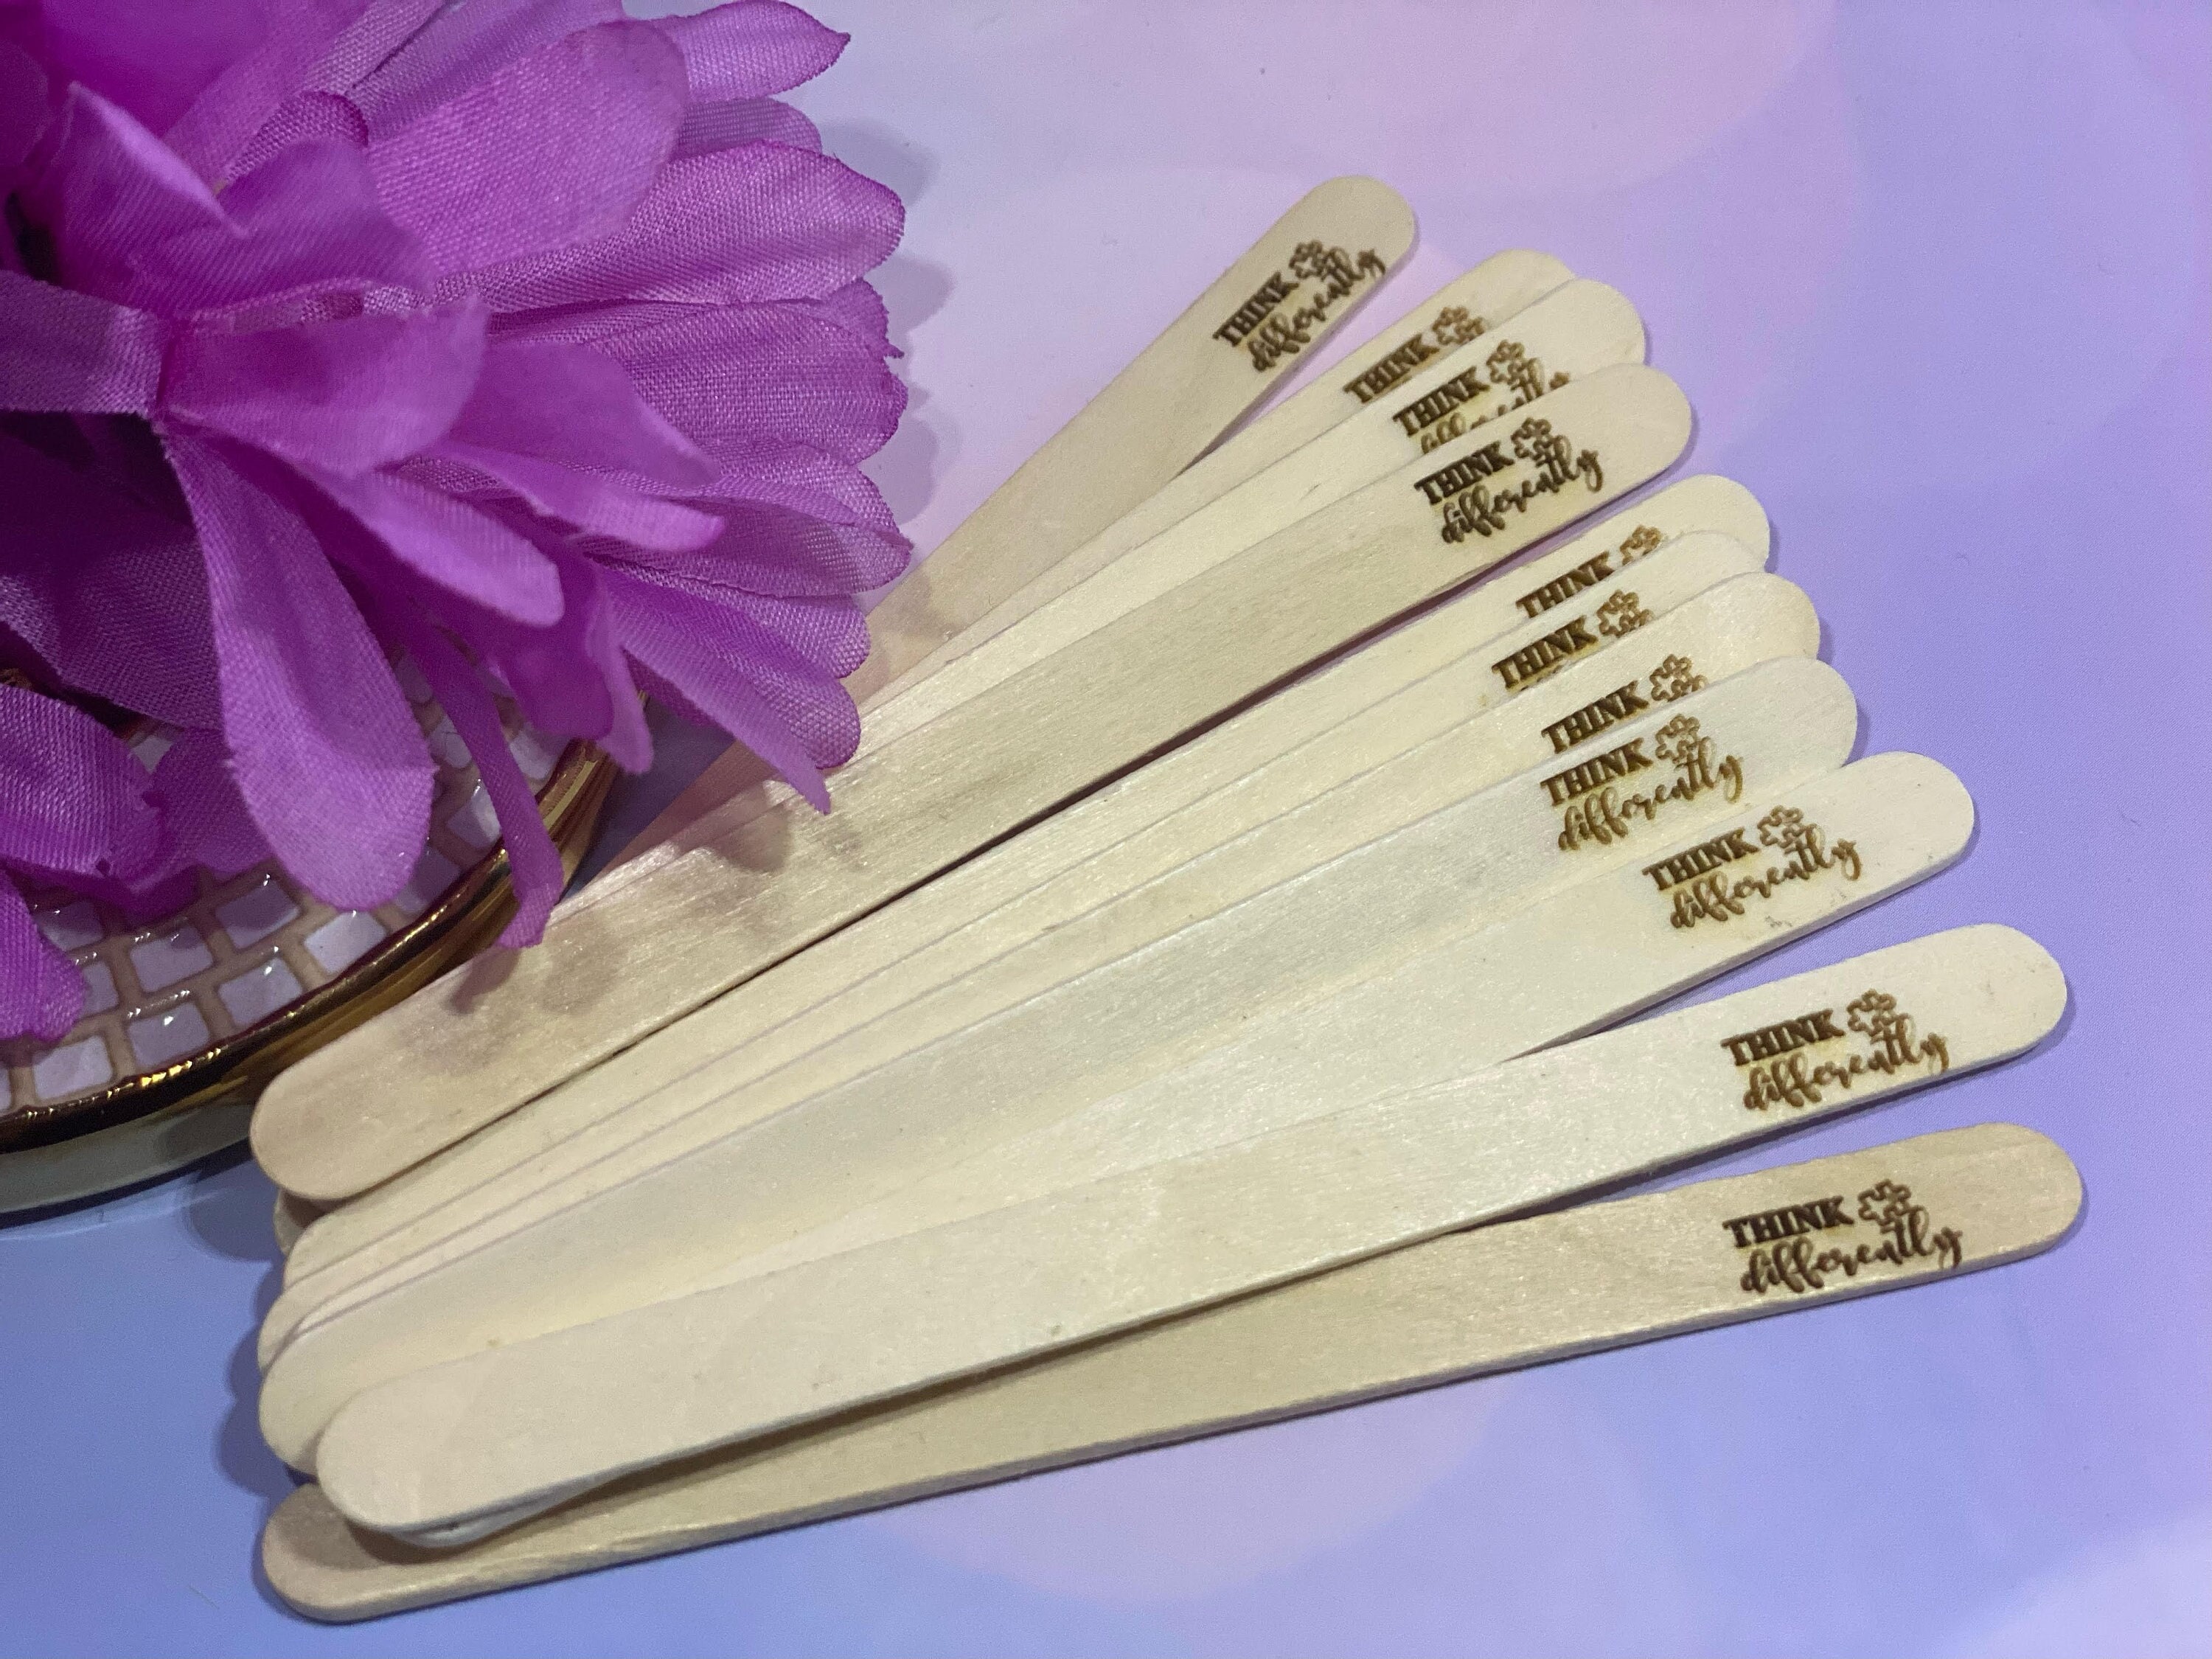 Wooden Popsicle Sticks for Cakesicles, Cake Pops, Ice Cream Pops, and  Krispie Treats Qty 50 